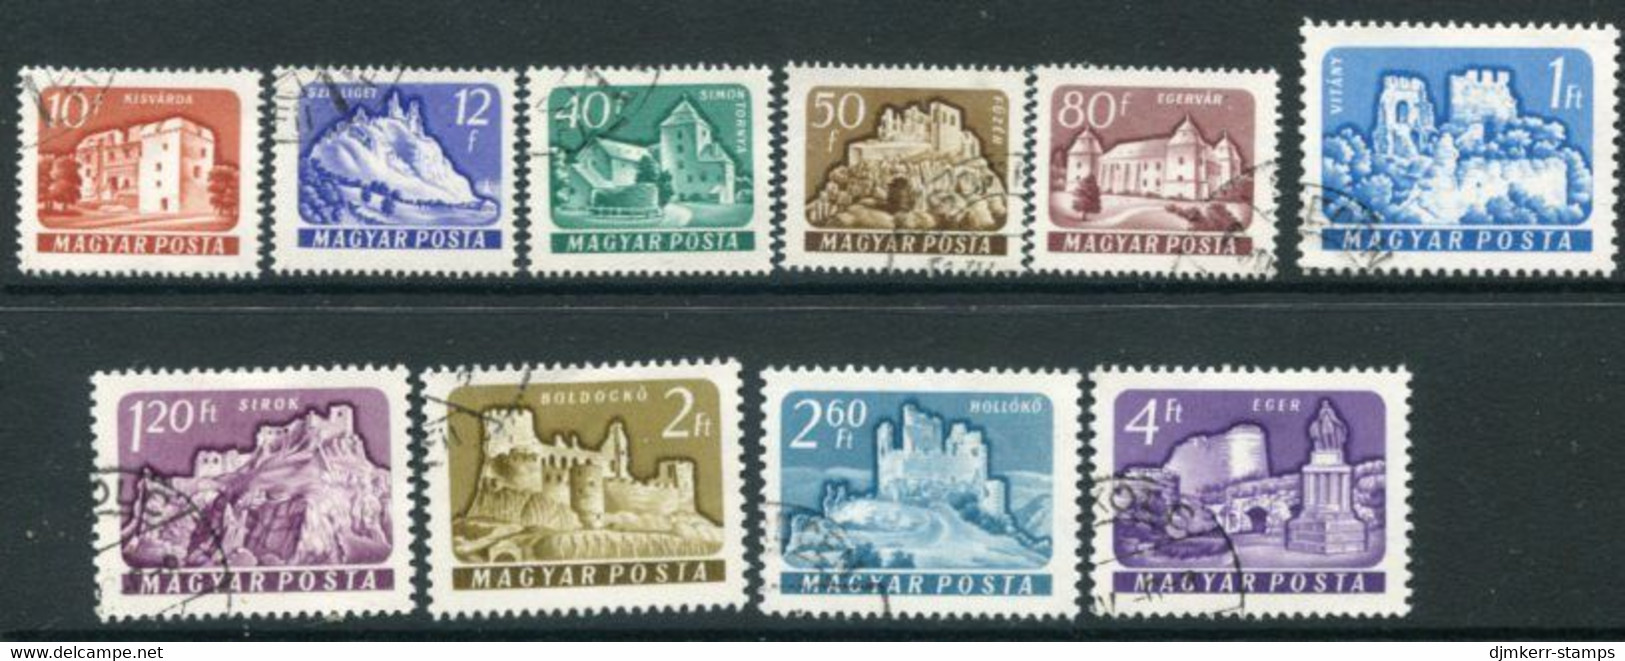 HUNGARY 1961 Castles Definitive Used.  Michel 1737-46 - Used Stamps